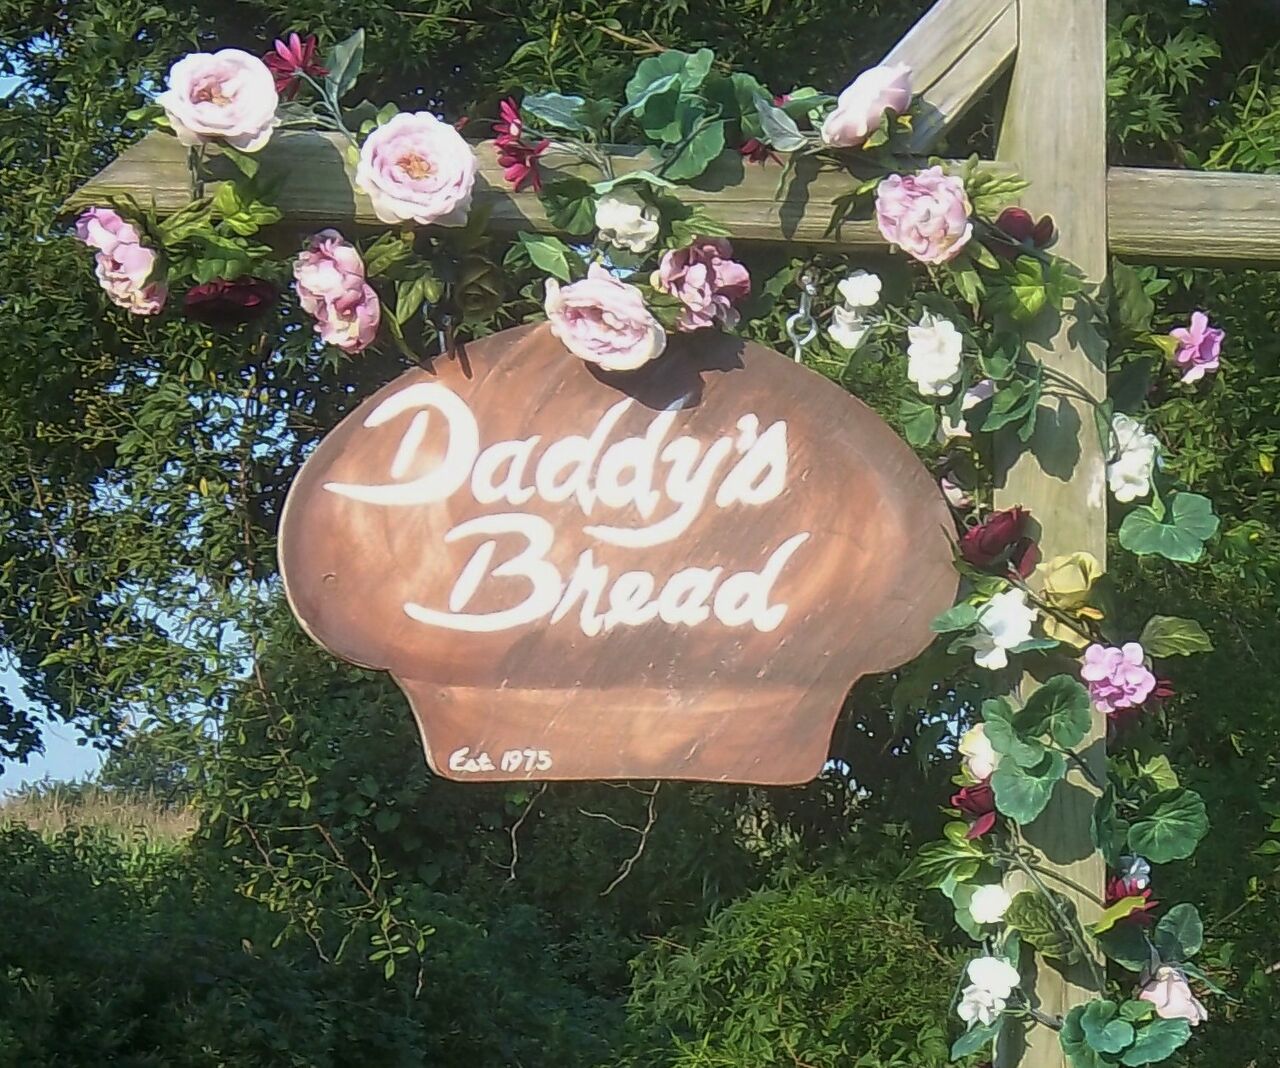 A photo of Daddy's Bread